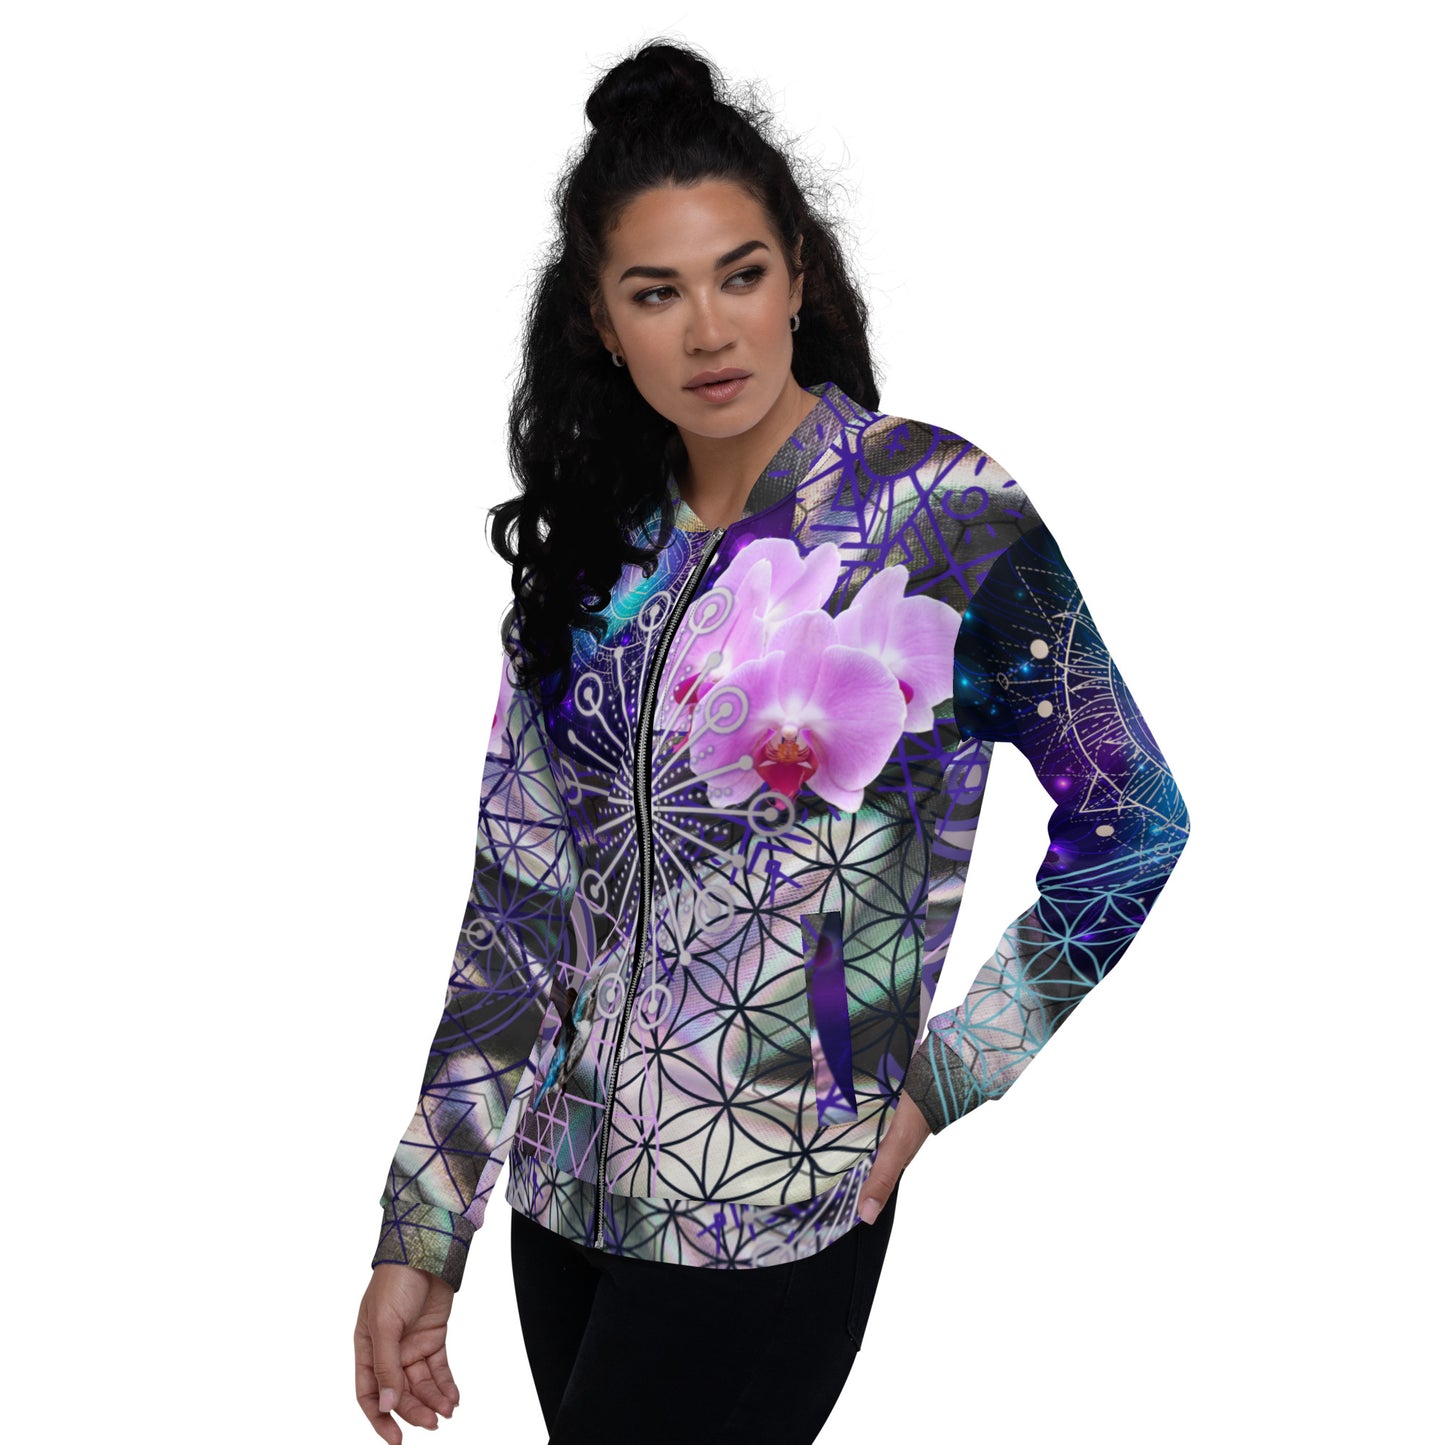 Hummingbird Orchid Abstract Print Psychedelic Festival Rave All Over Print UNISEX BOMBER JACKET